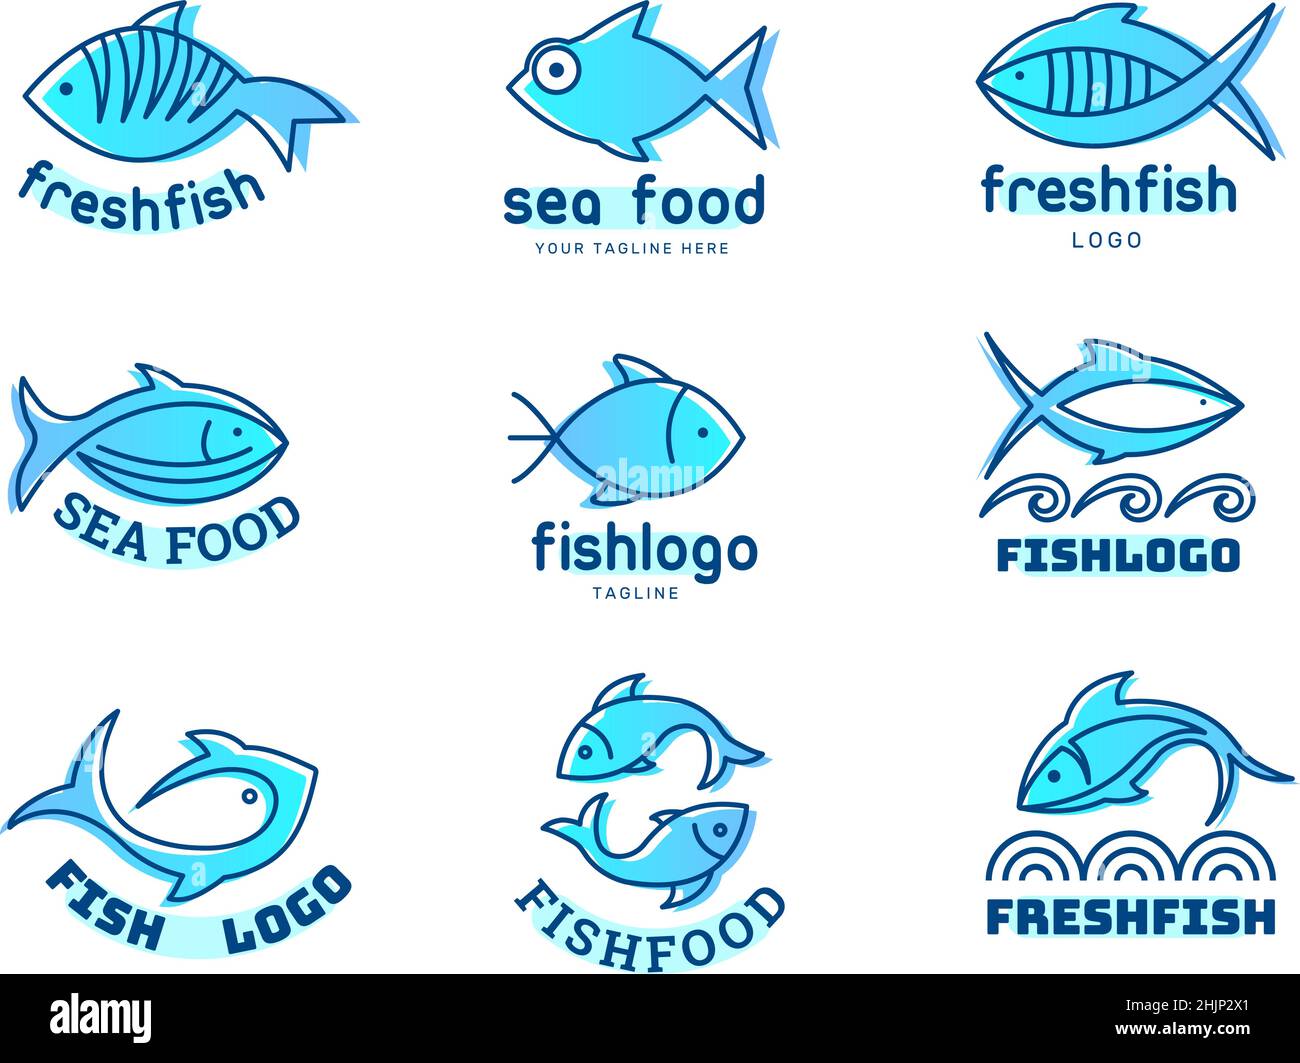 Fish logo. Stylized underwater animals icons identity for restaurant menu waves seafood pictures recent vector concept templates Stock Vector